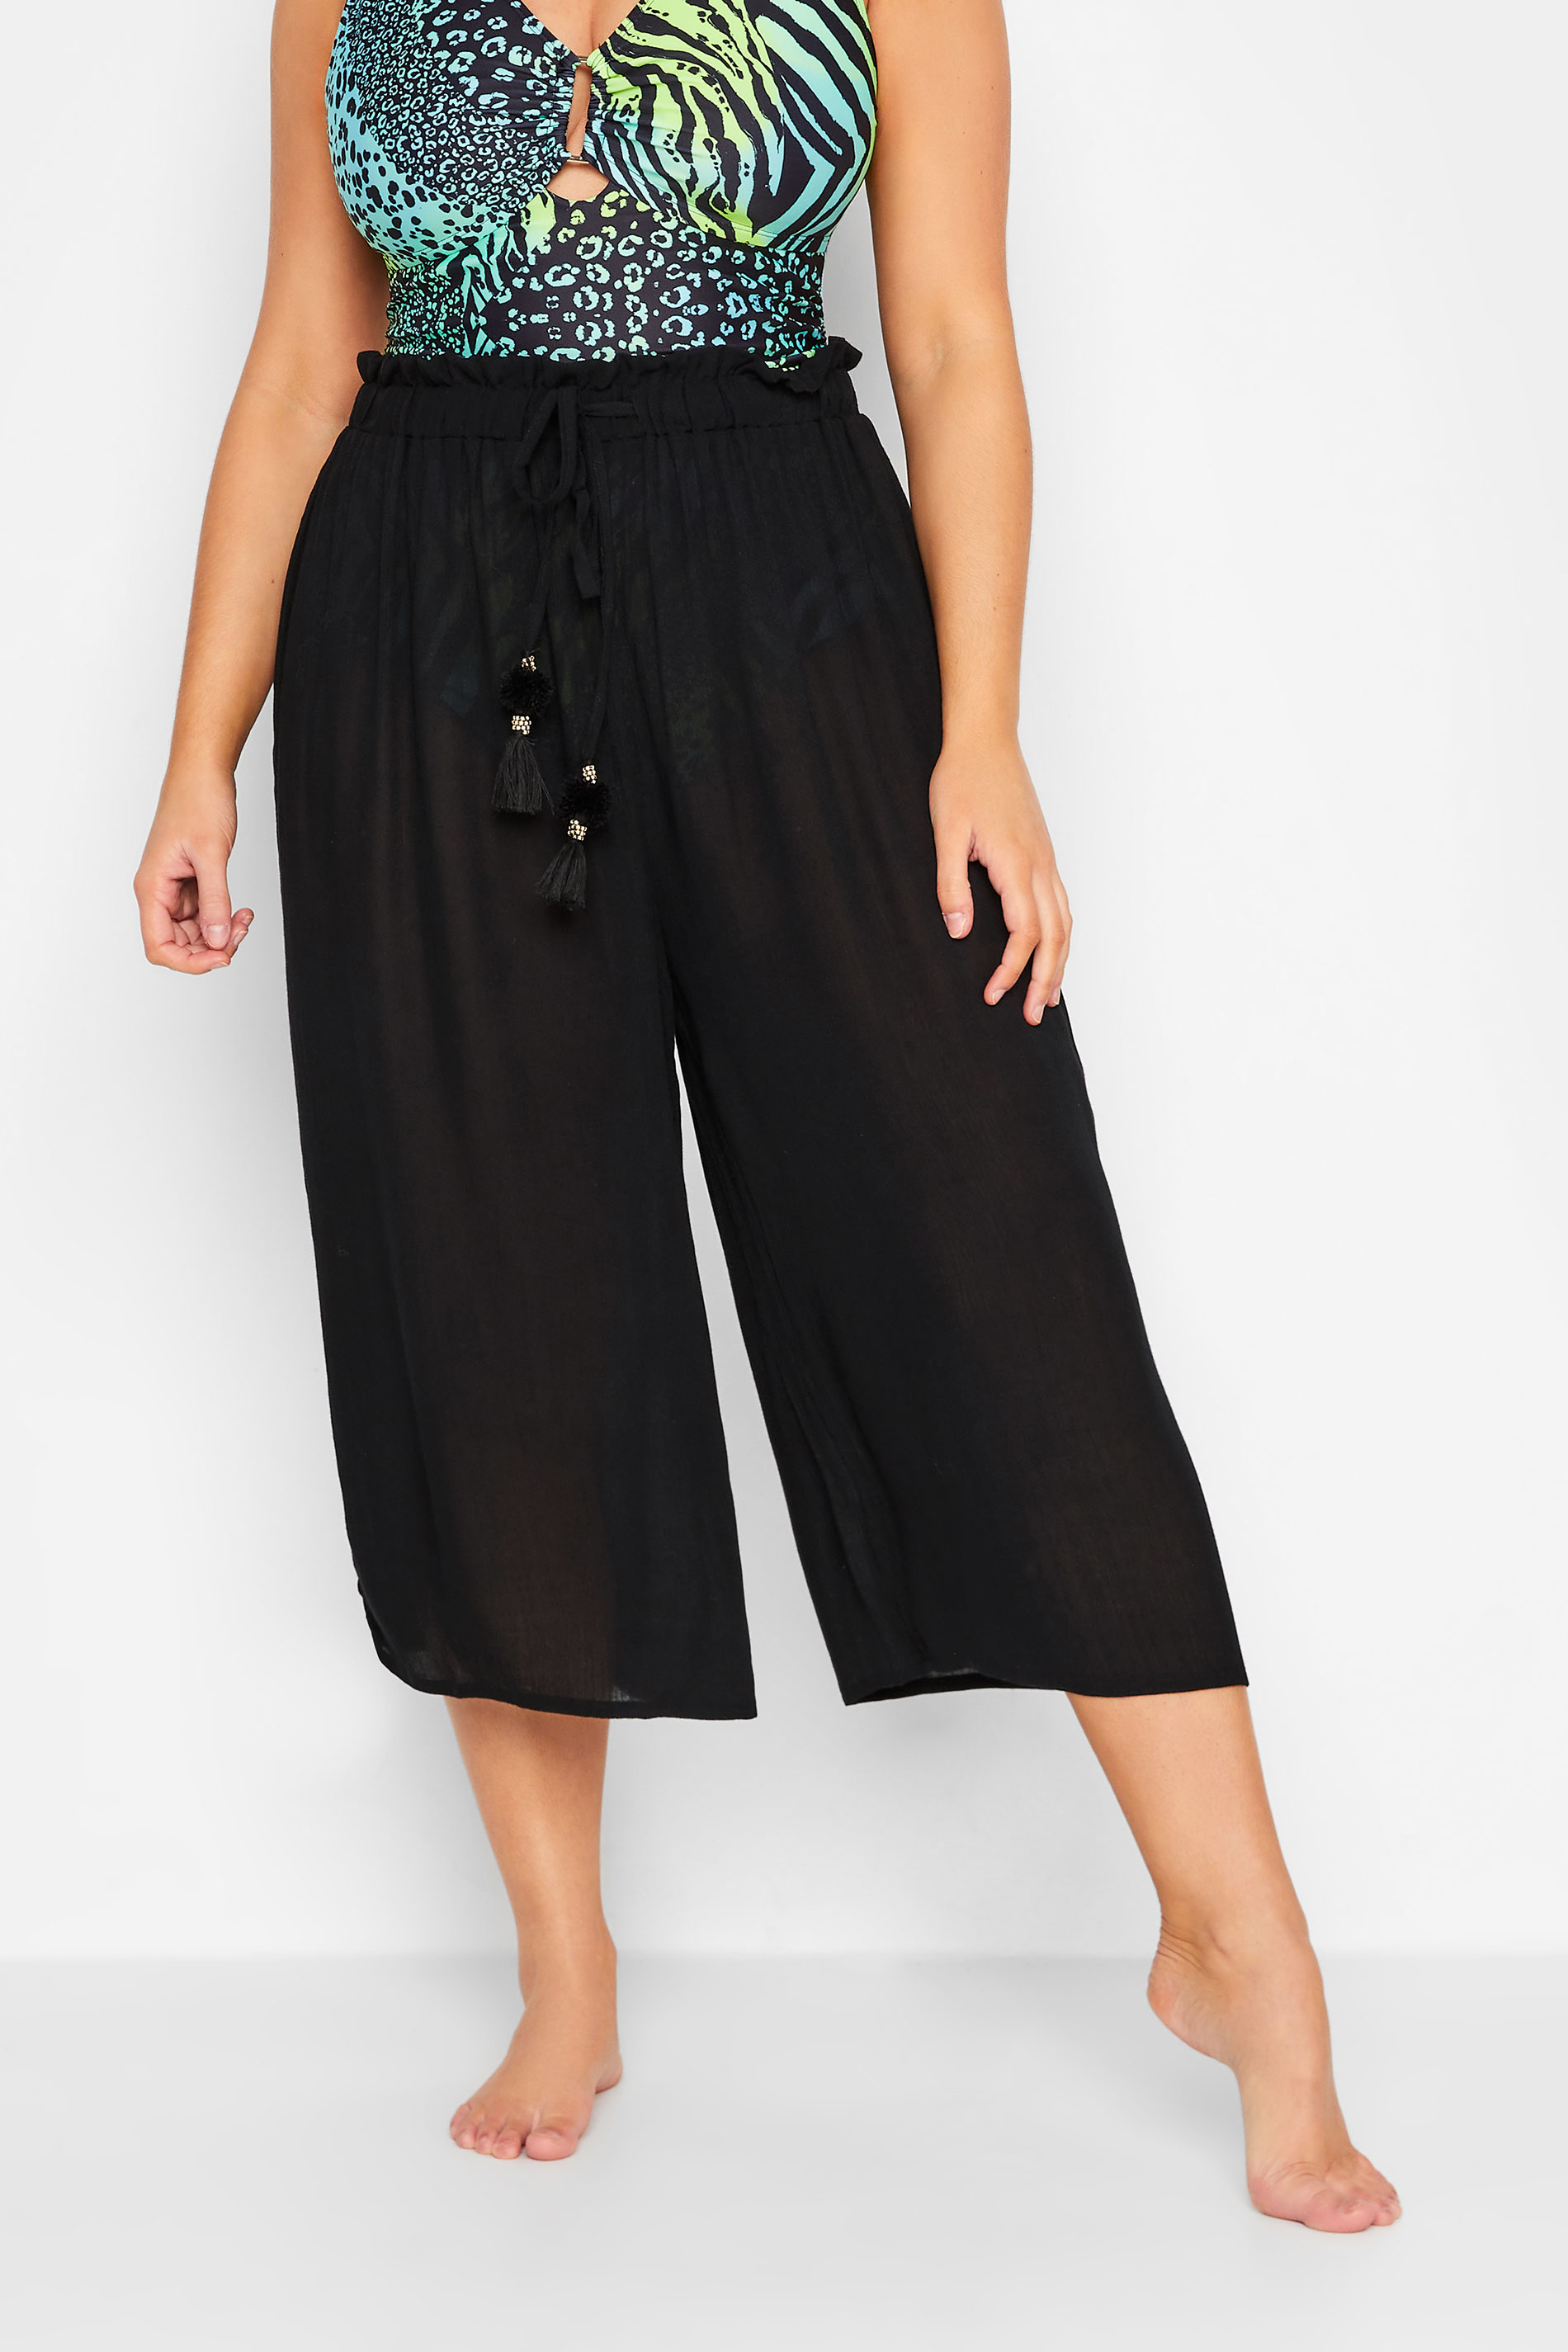 YOURS Plus Size Black Tassel Detail Wide Leg Beach Culottes | Yours Clothing 1